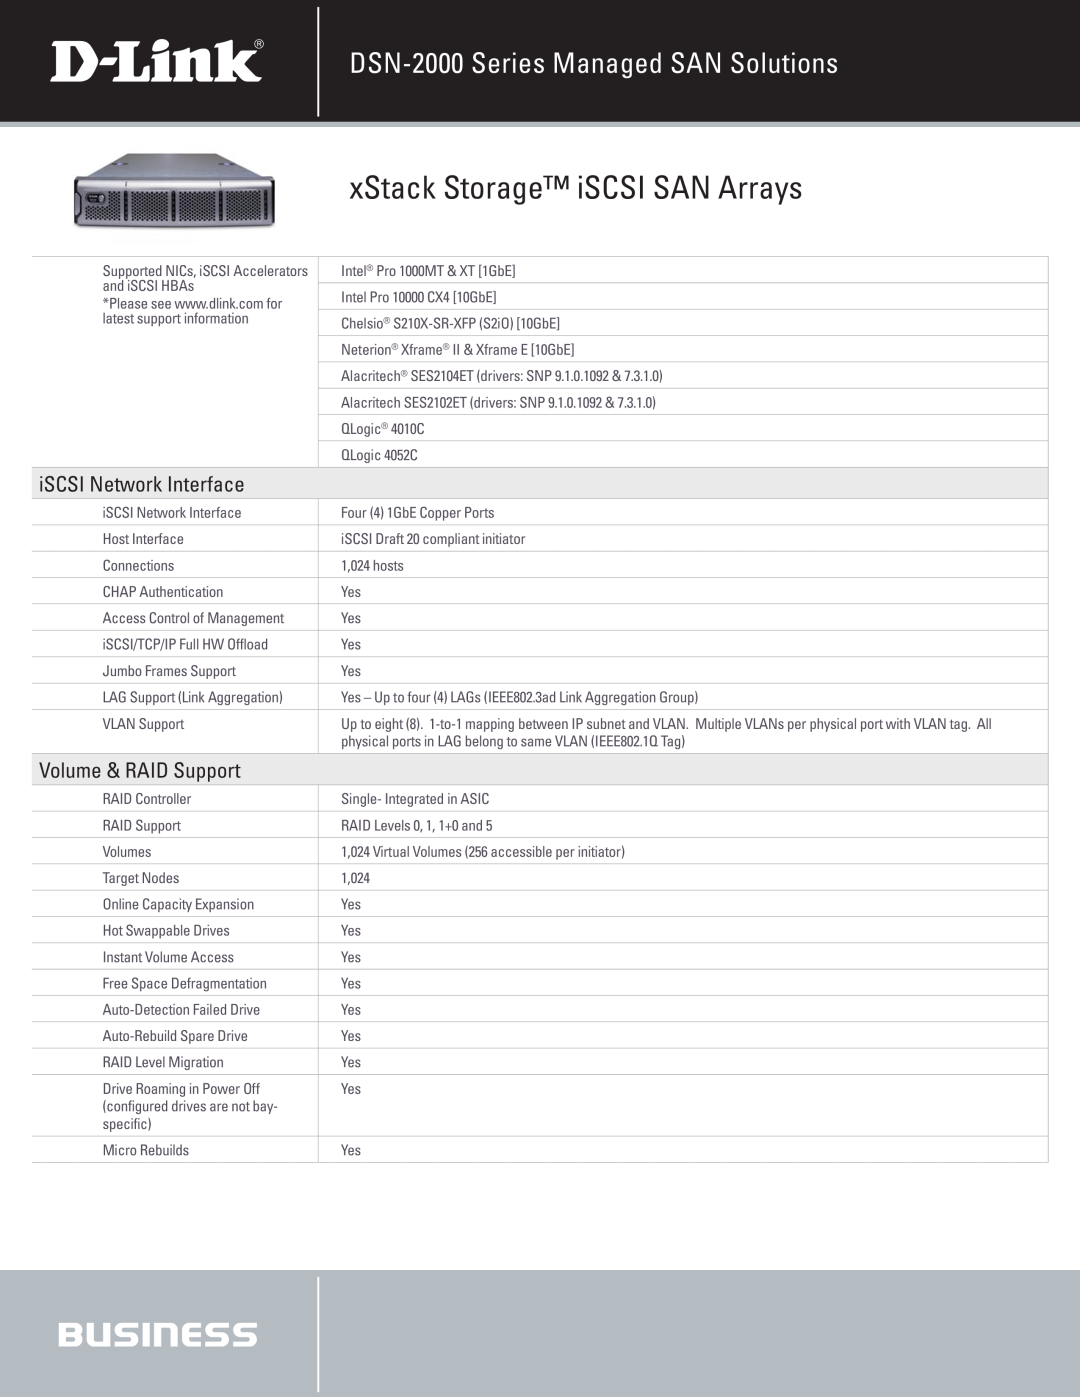 D-Link manual iSCSI Network Interface, xStack Storage iSCSI SAN Arrays, DSN-2000 Series Managed SAN Solutions 